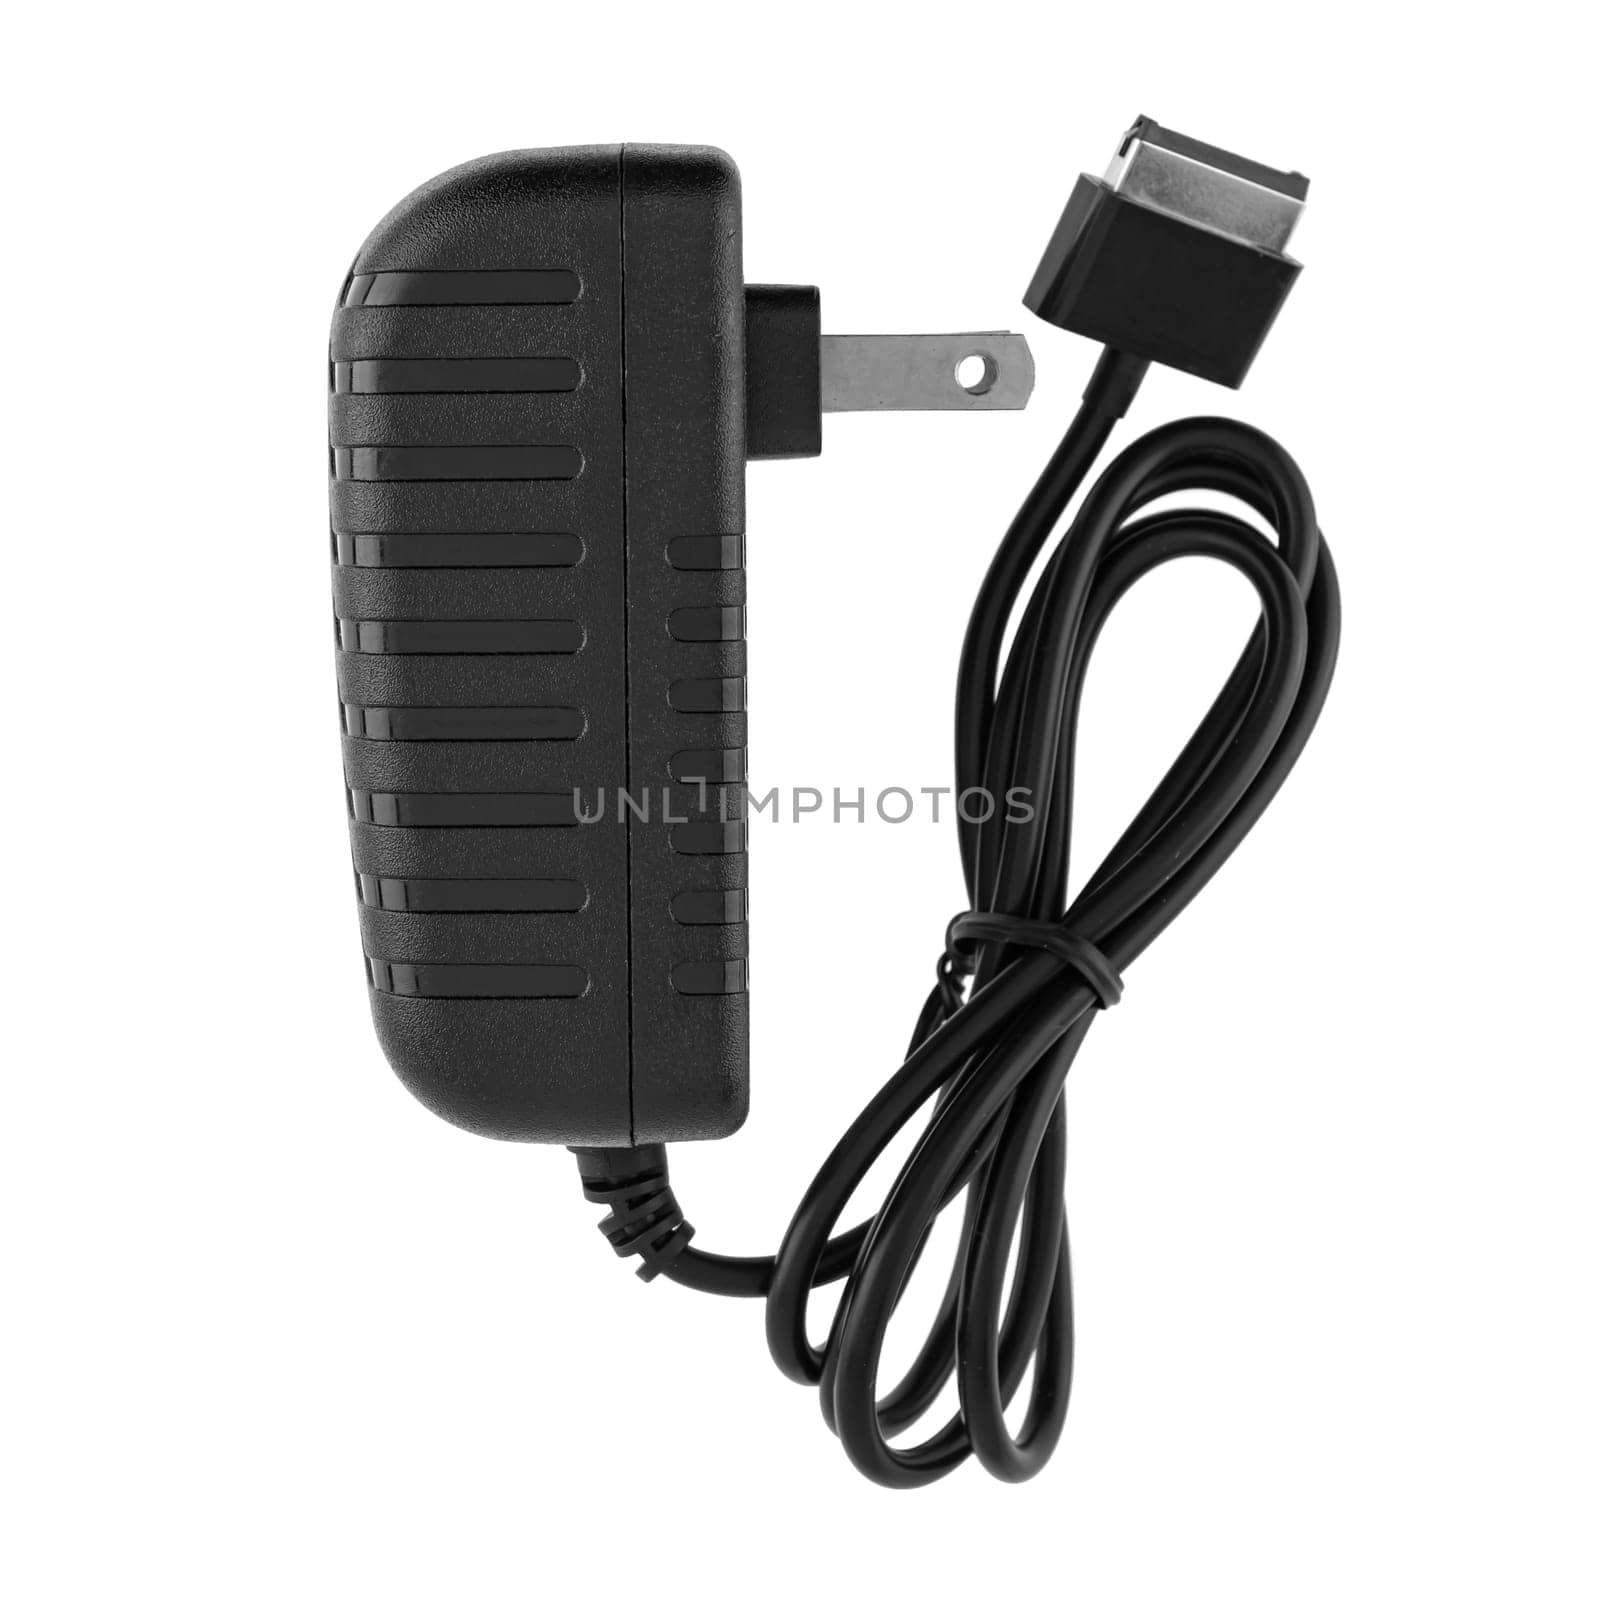 Power adapter, insulated, white background